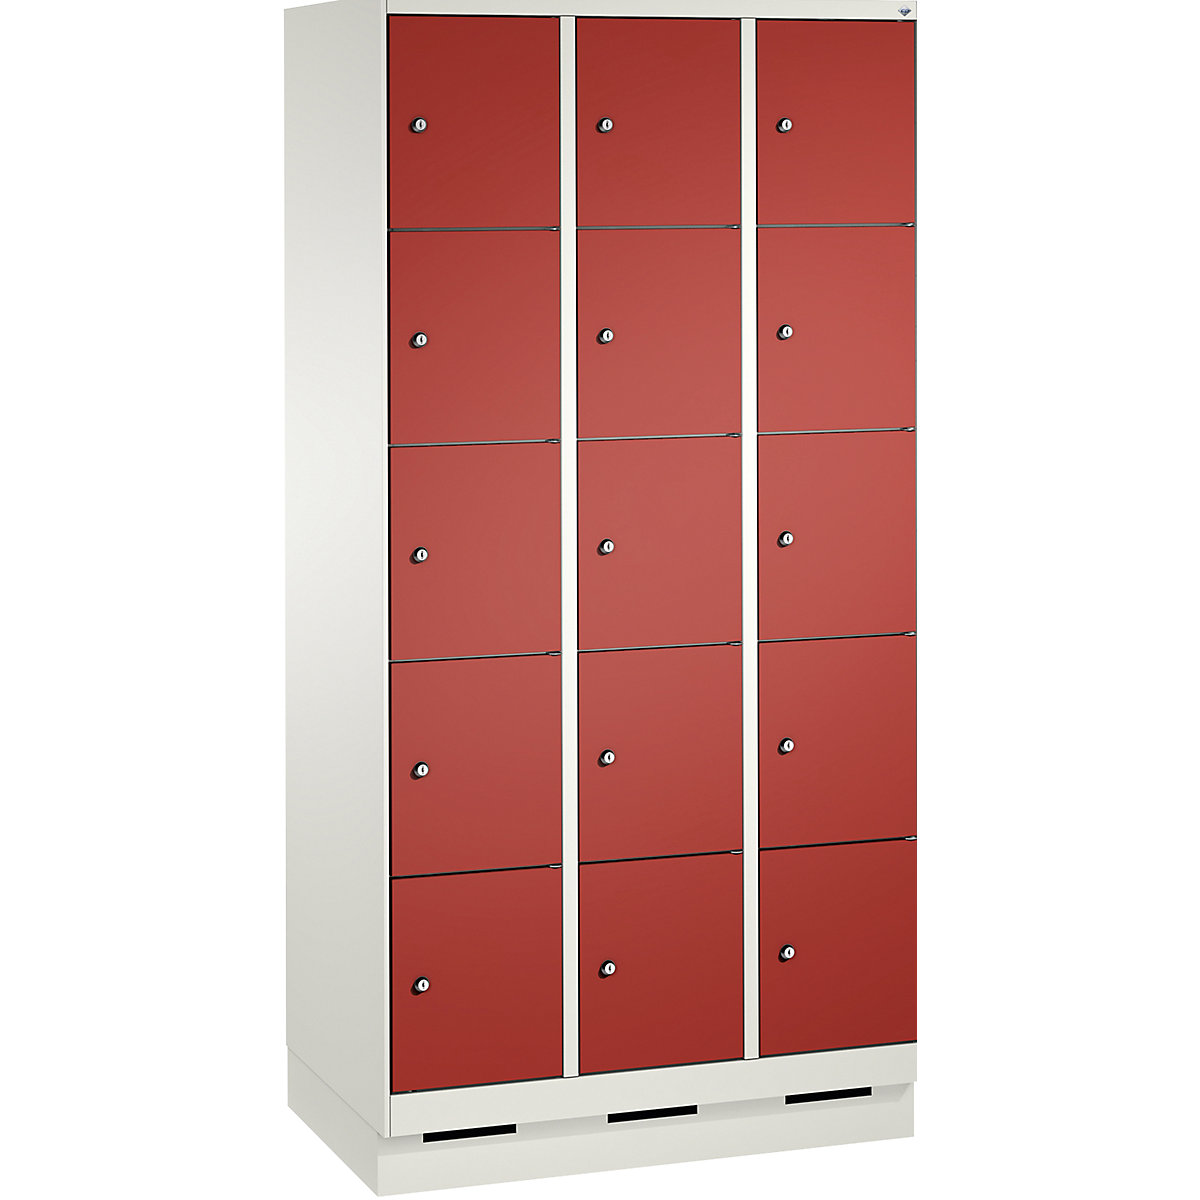 EVOLO locker unit, with plinth – C+P, 3 compartments, 5 shelf compartments each, compartment width 300 mm, traffic white / flame red